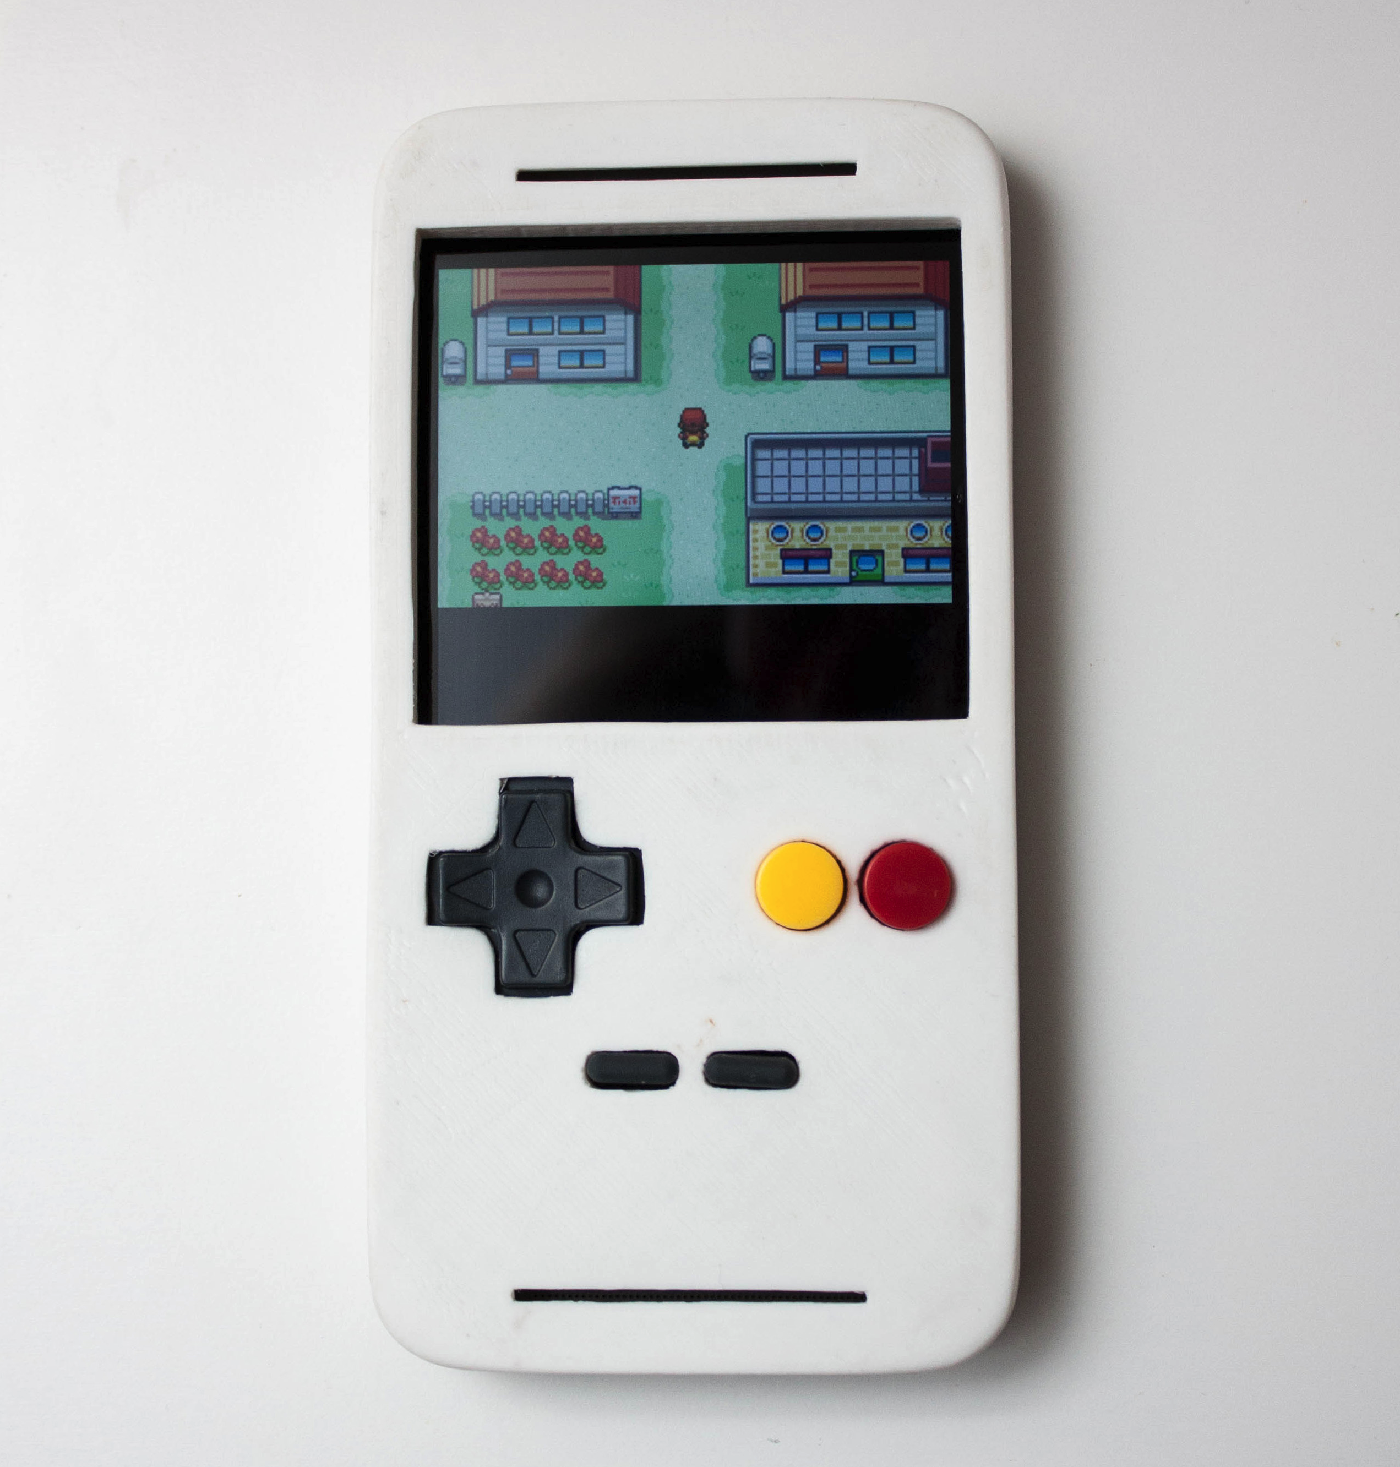 3D Printed Case Makes Your Smartphone More Like A Game Boy